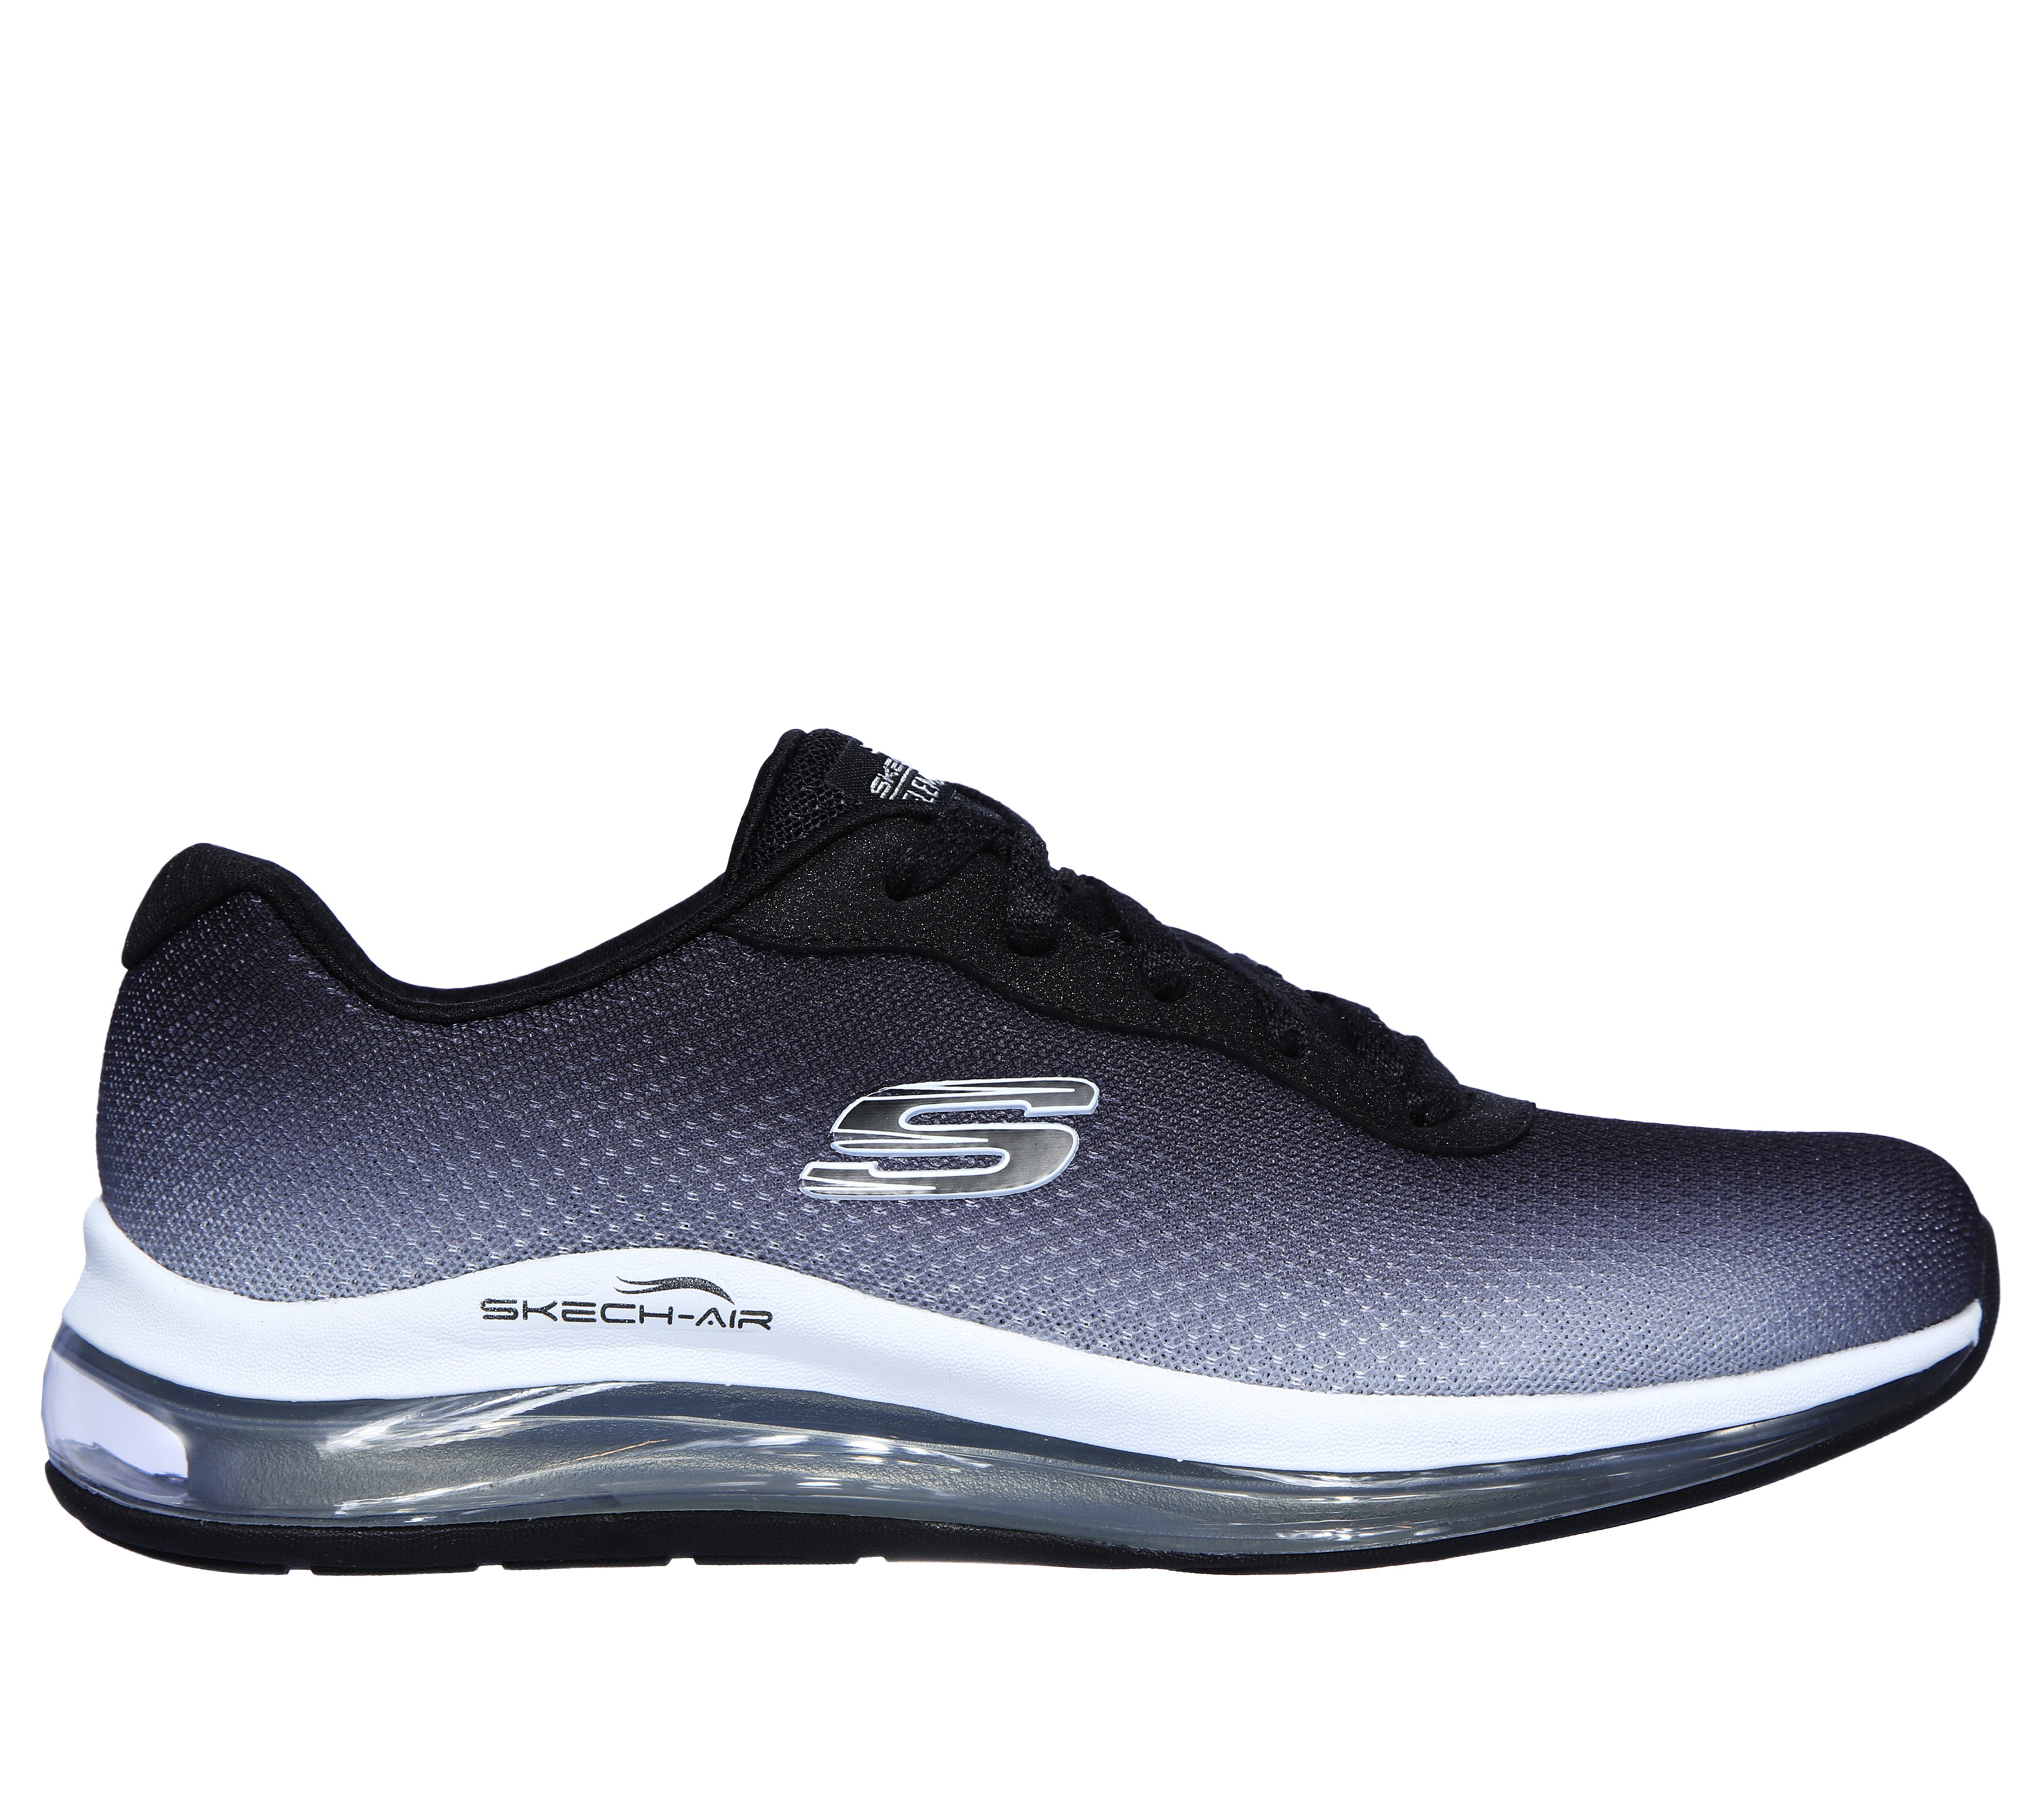 the Skech-Air Element 2.0 | SKECHERS